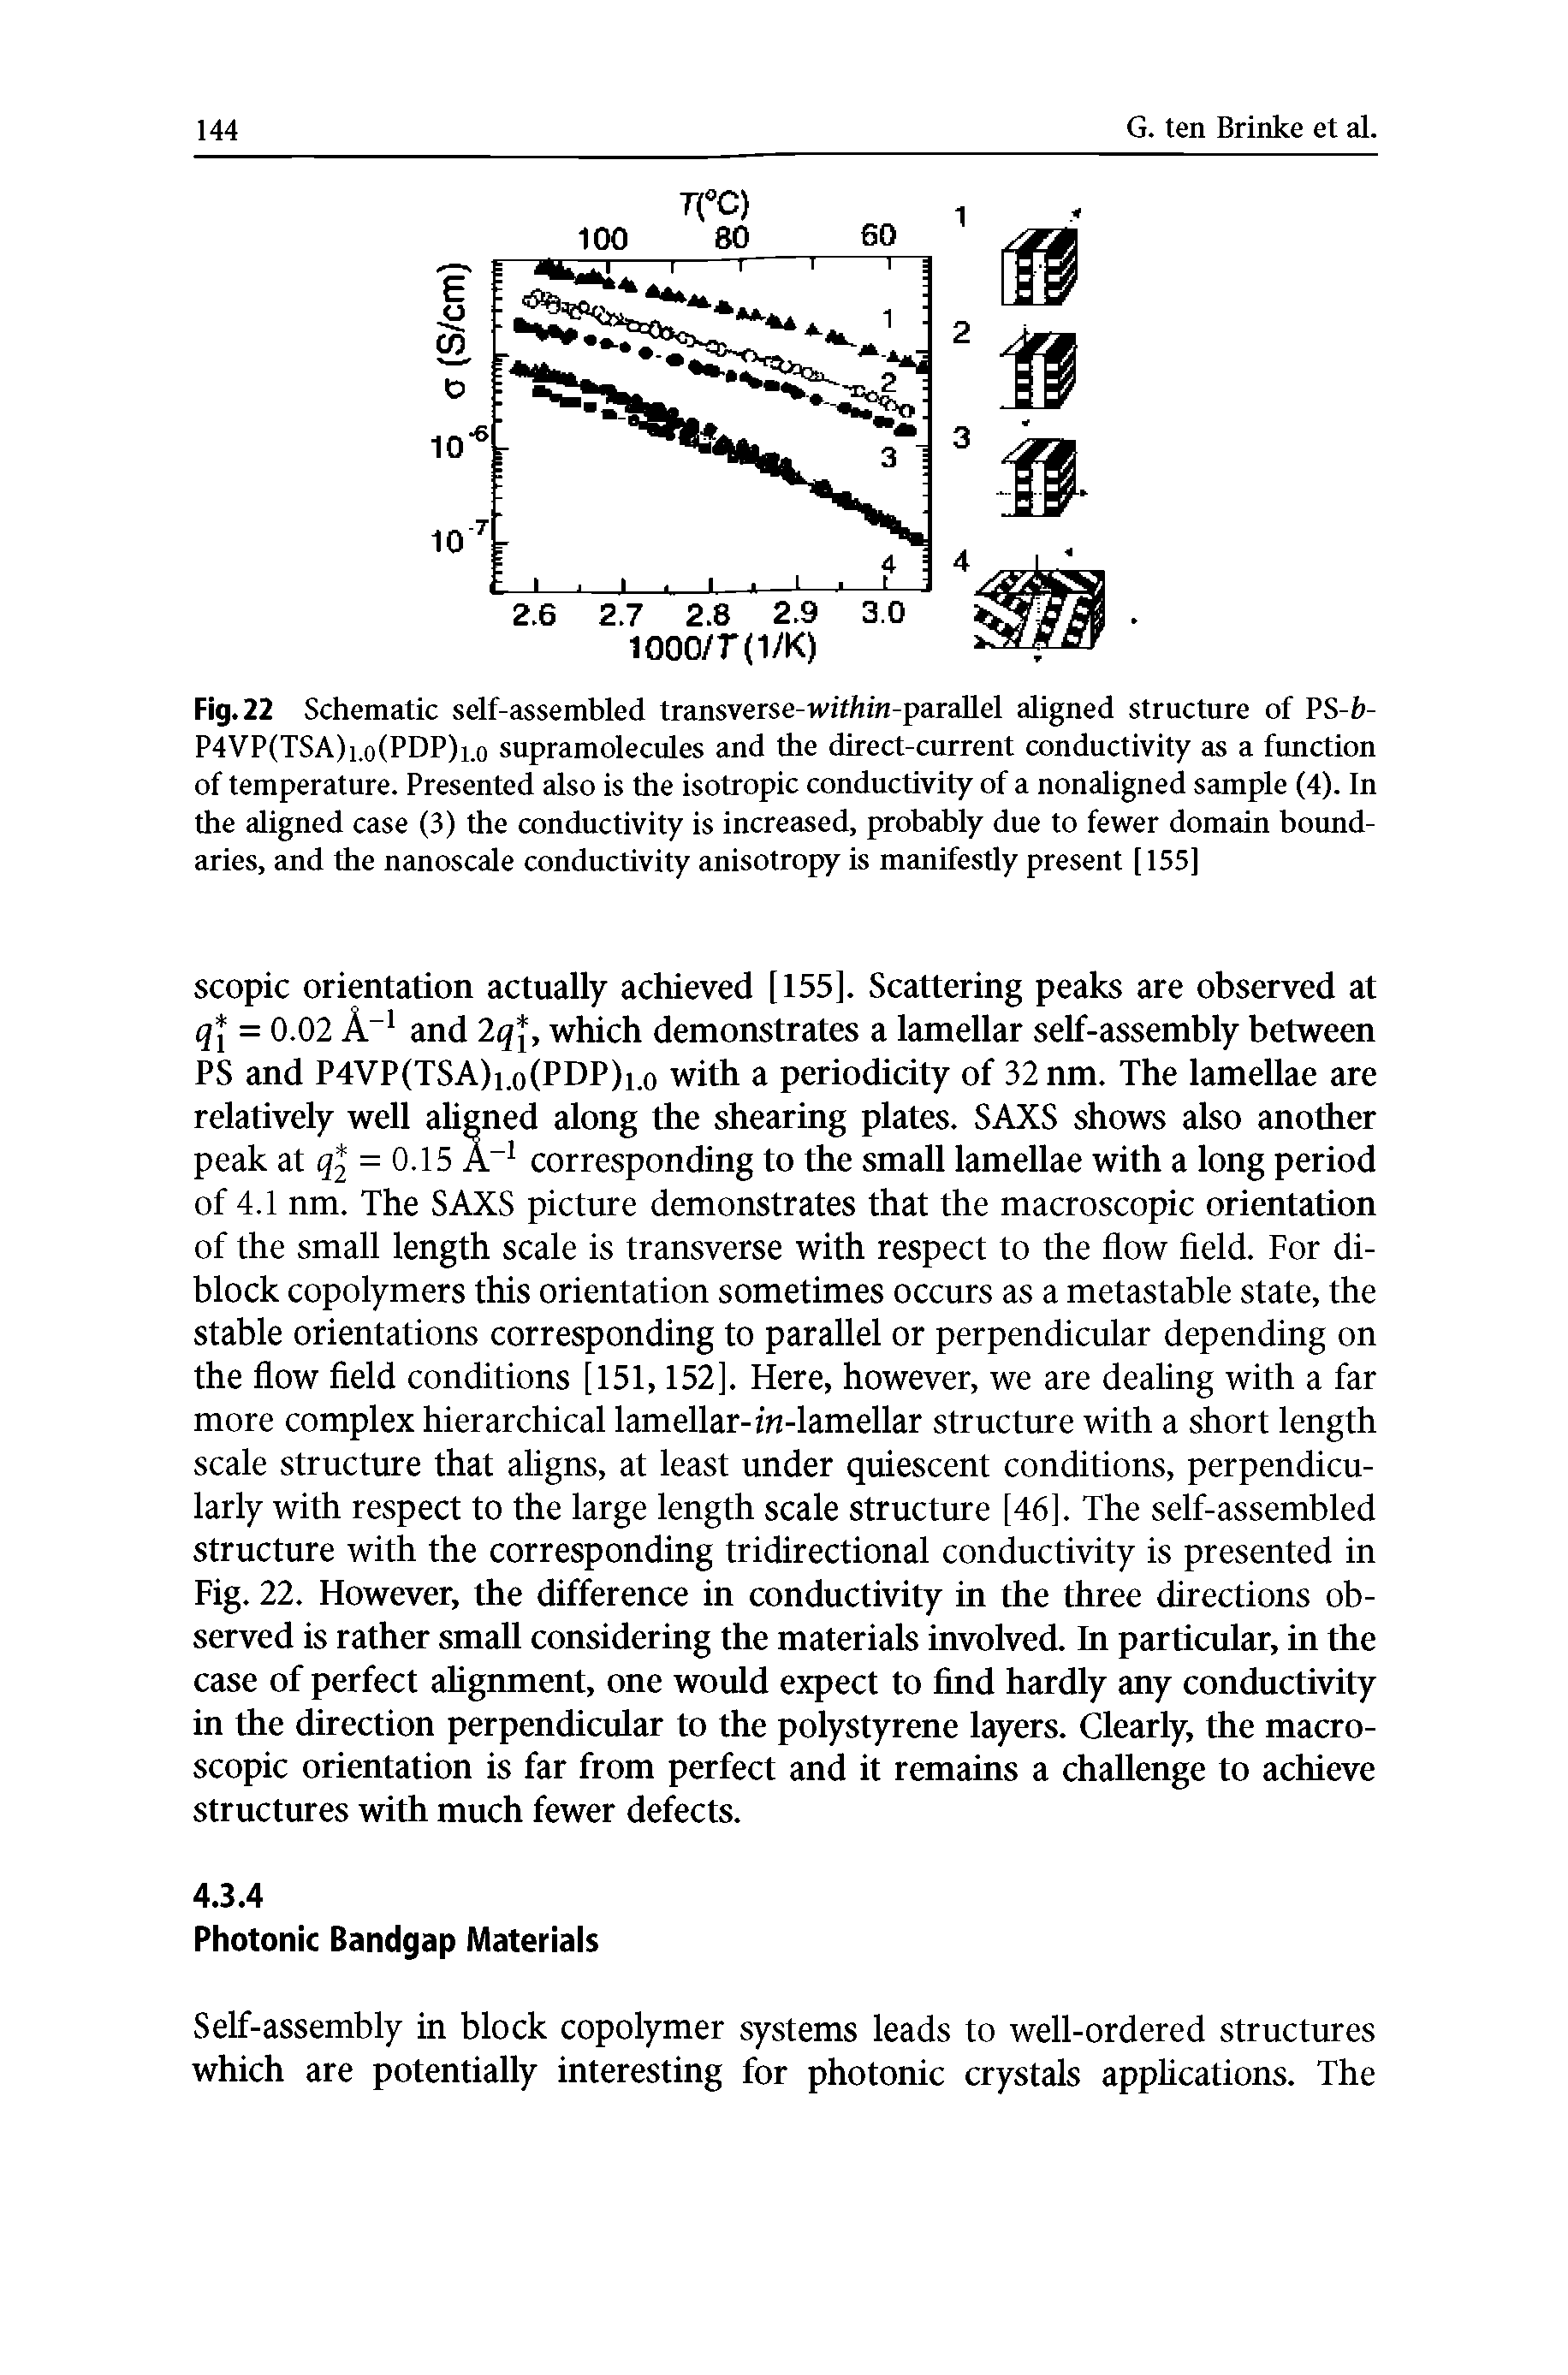 Fig. 22 Schematic self-assembled transverse-witlzin-parallel aligned structure of PS-6-P4VP(TSA)i.o(PDP)i.o supramolecules and the direct-current conductivity as a fimction of temperature. Presented also is the isotropic conductivity of a nonaligned sample (4). In the aligned case (3) the conductivity is increased, probably due to fewer domain boimd-aries, and the nanoscale conductivity anisotropy is manifestly present [155]...